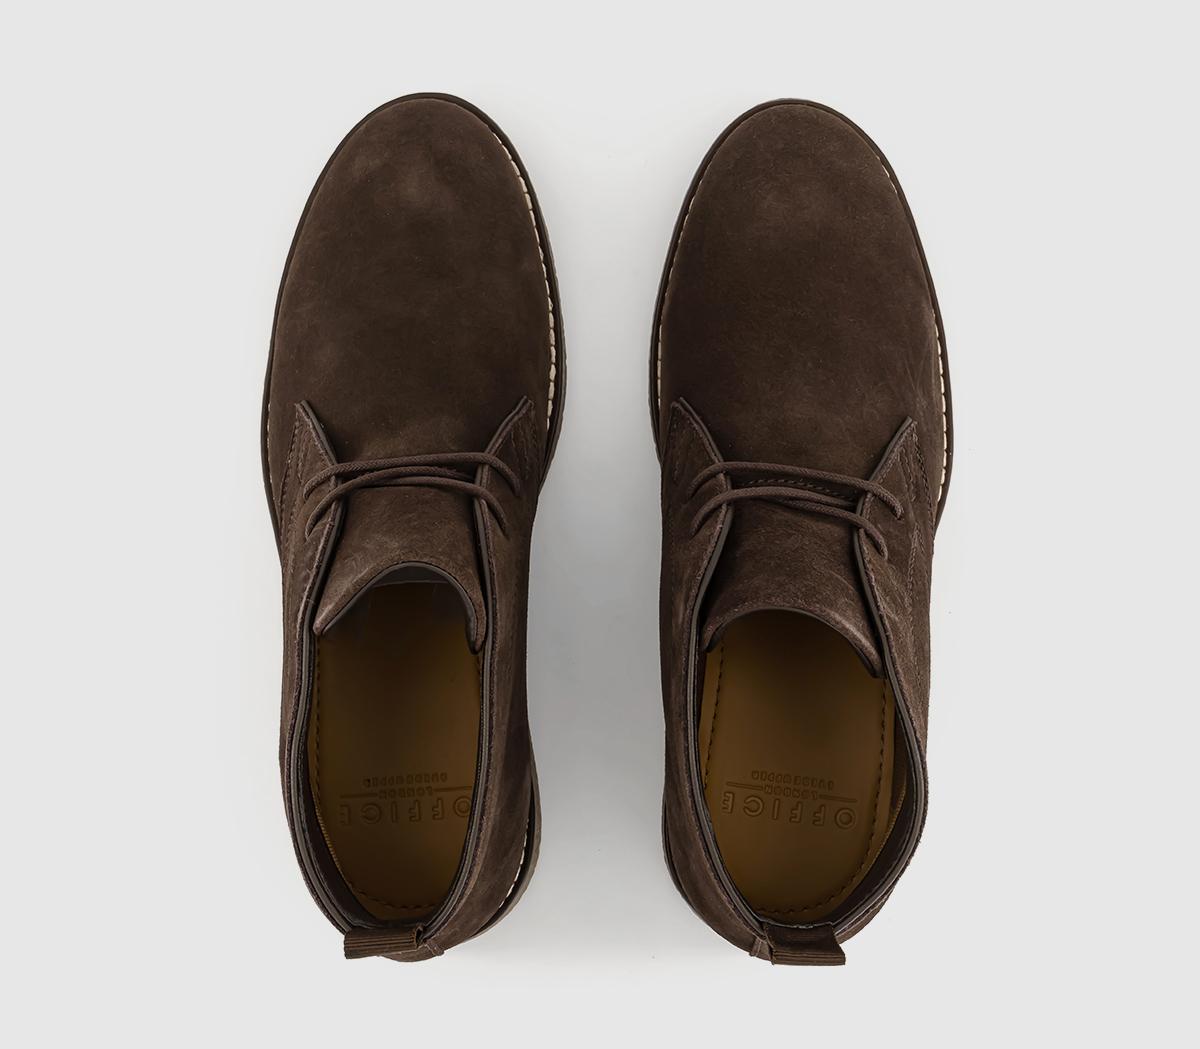 OFFICE Byron Crepe Look Chukka Boots Brown Suede - Men’s Boots